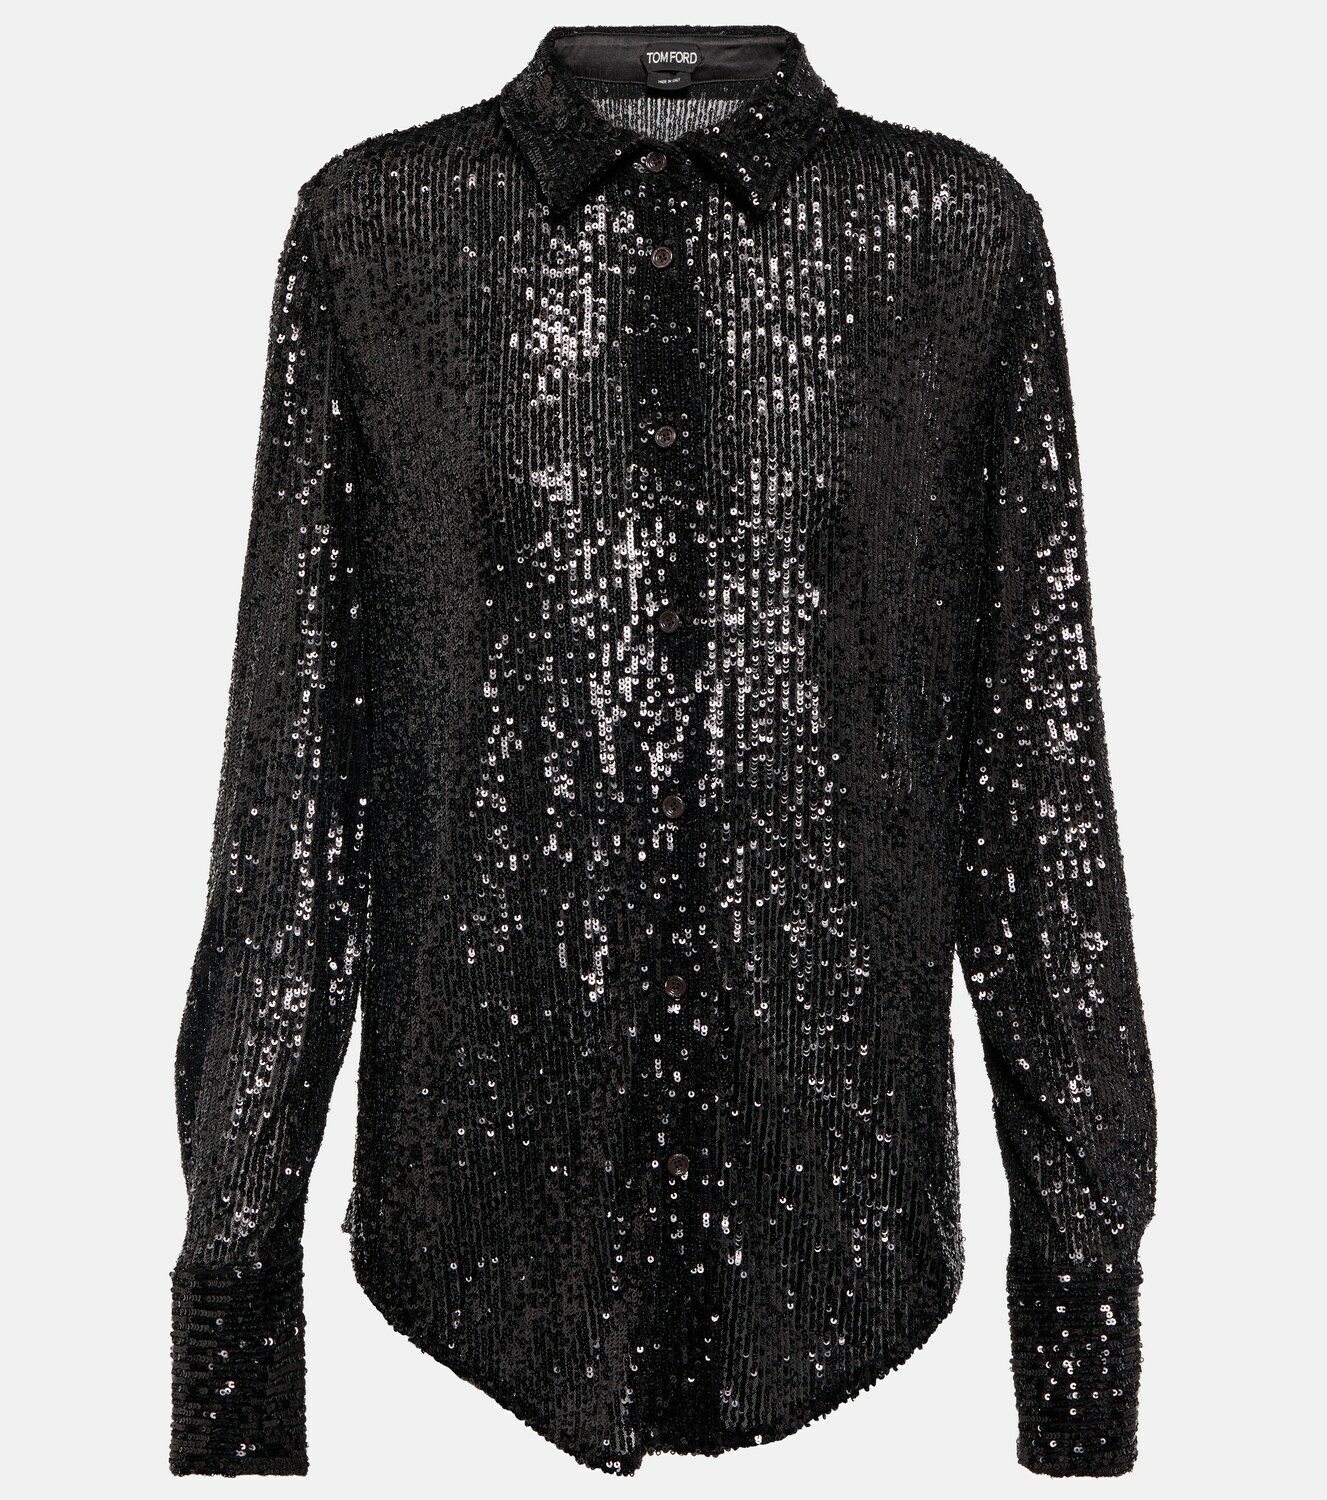 Tom Ford - Sequined shirt TOM FORD